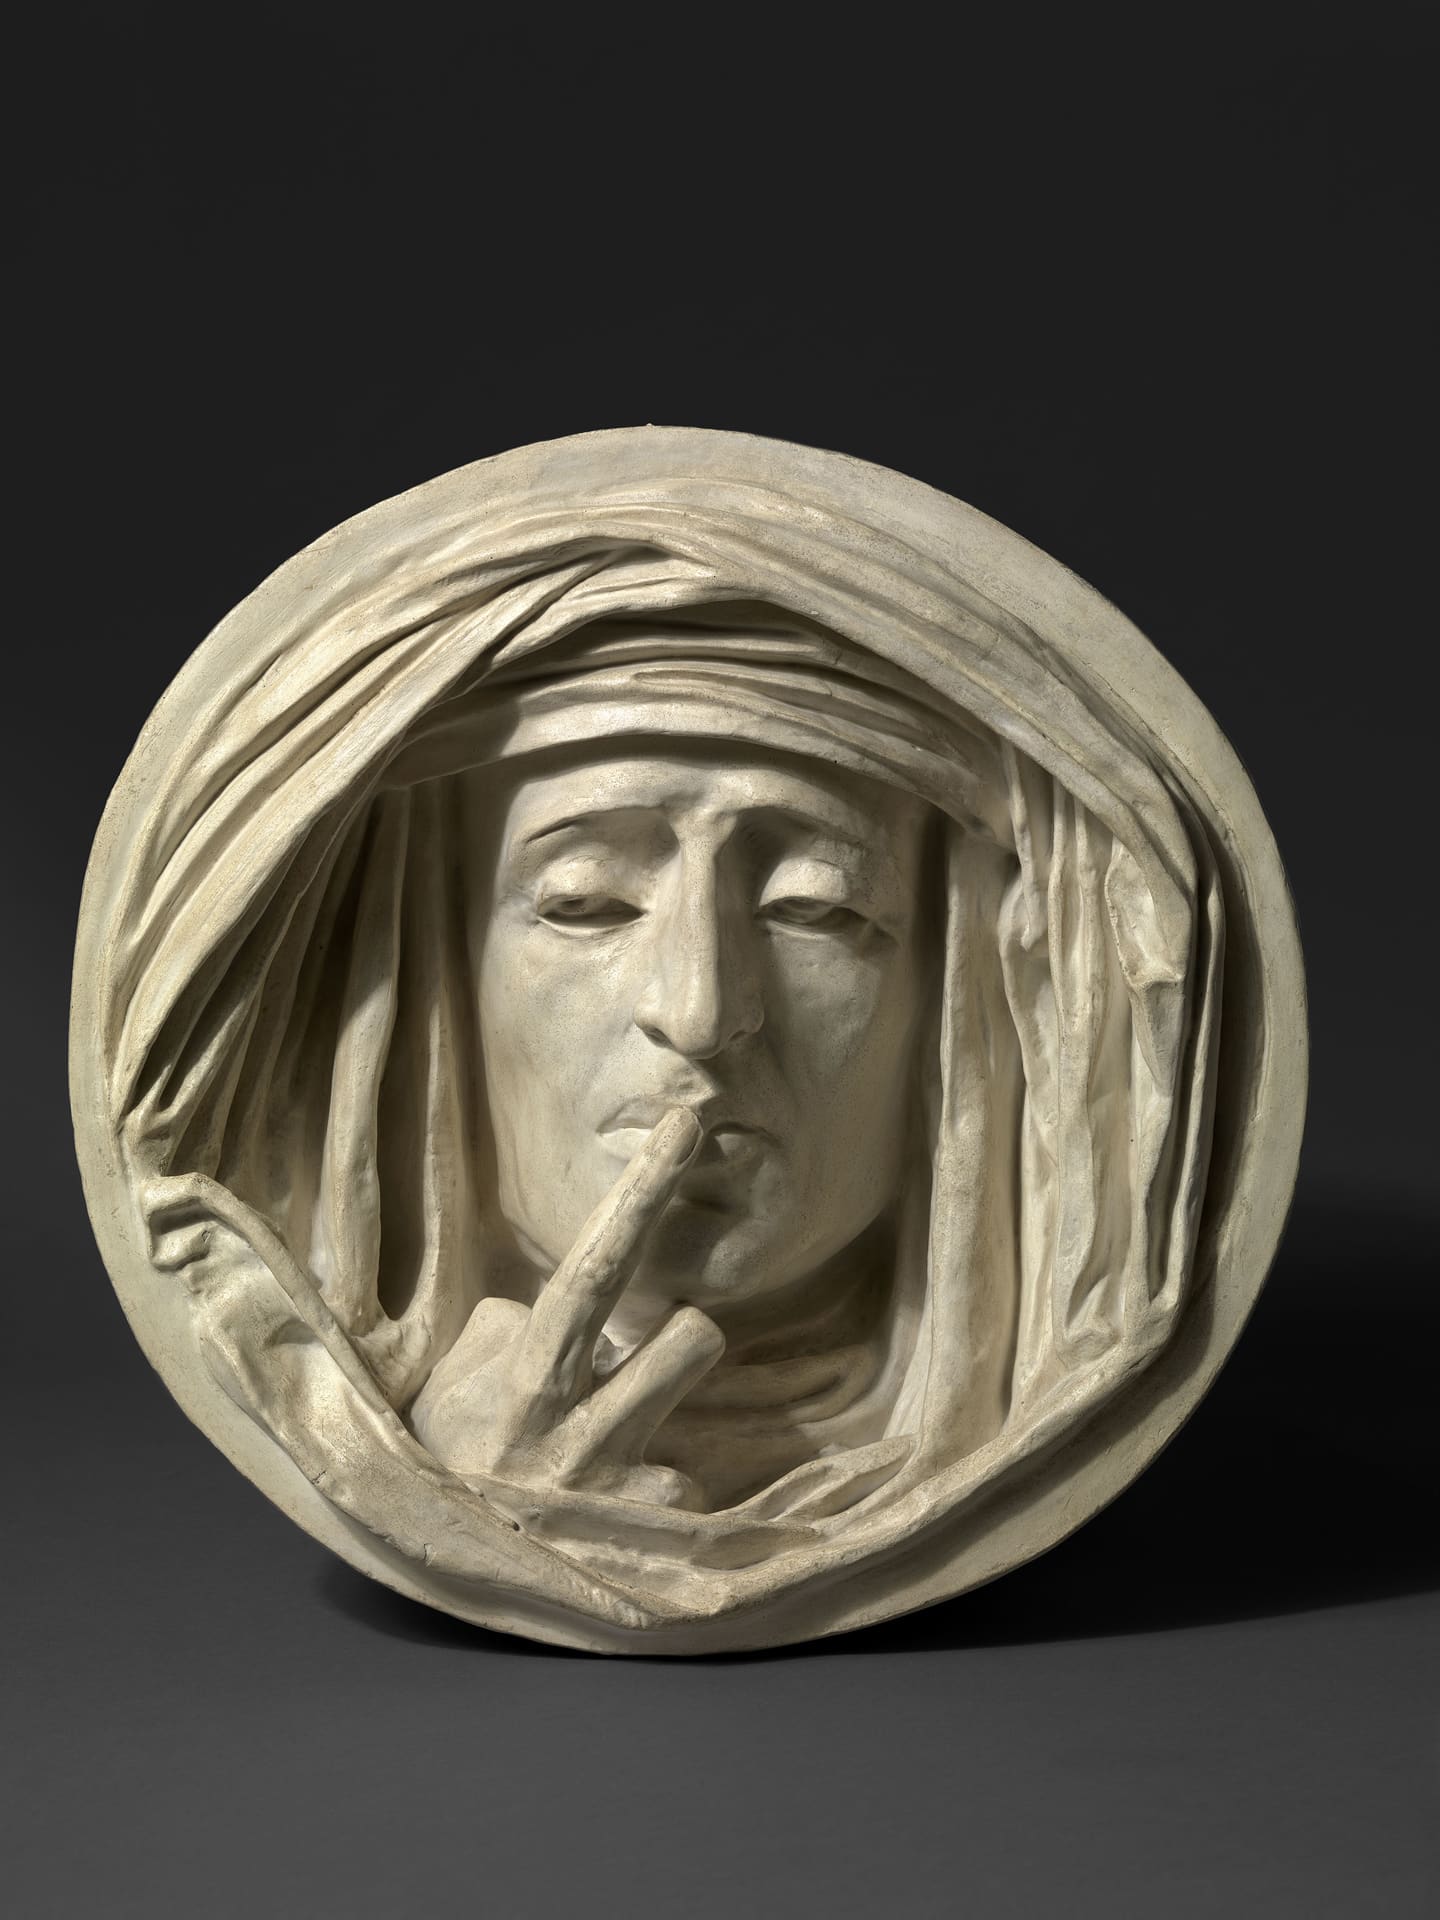 a sculpture of a woman's face holding her finger to her lips, in a circle